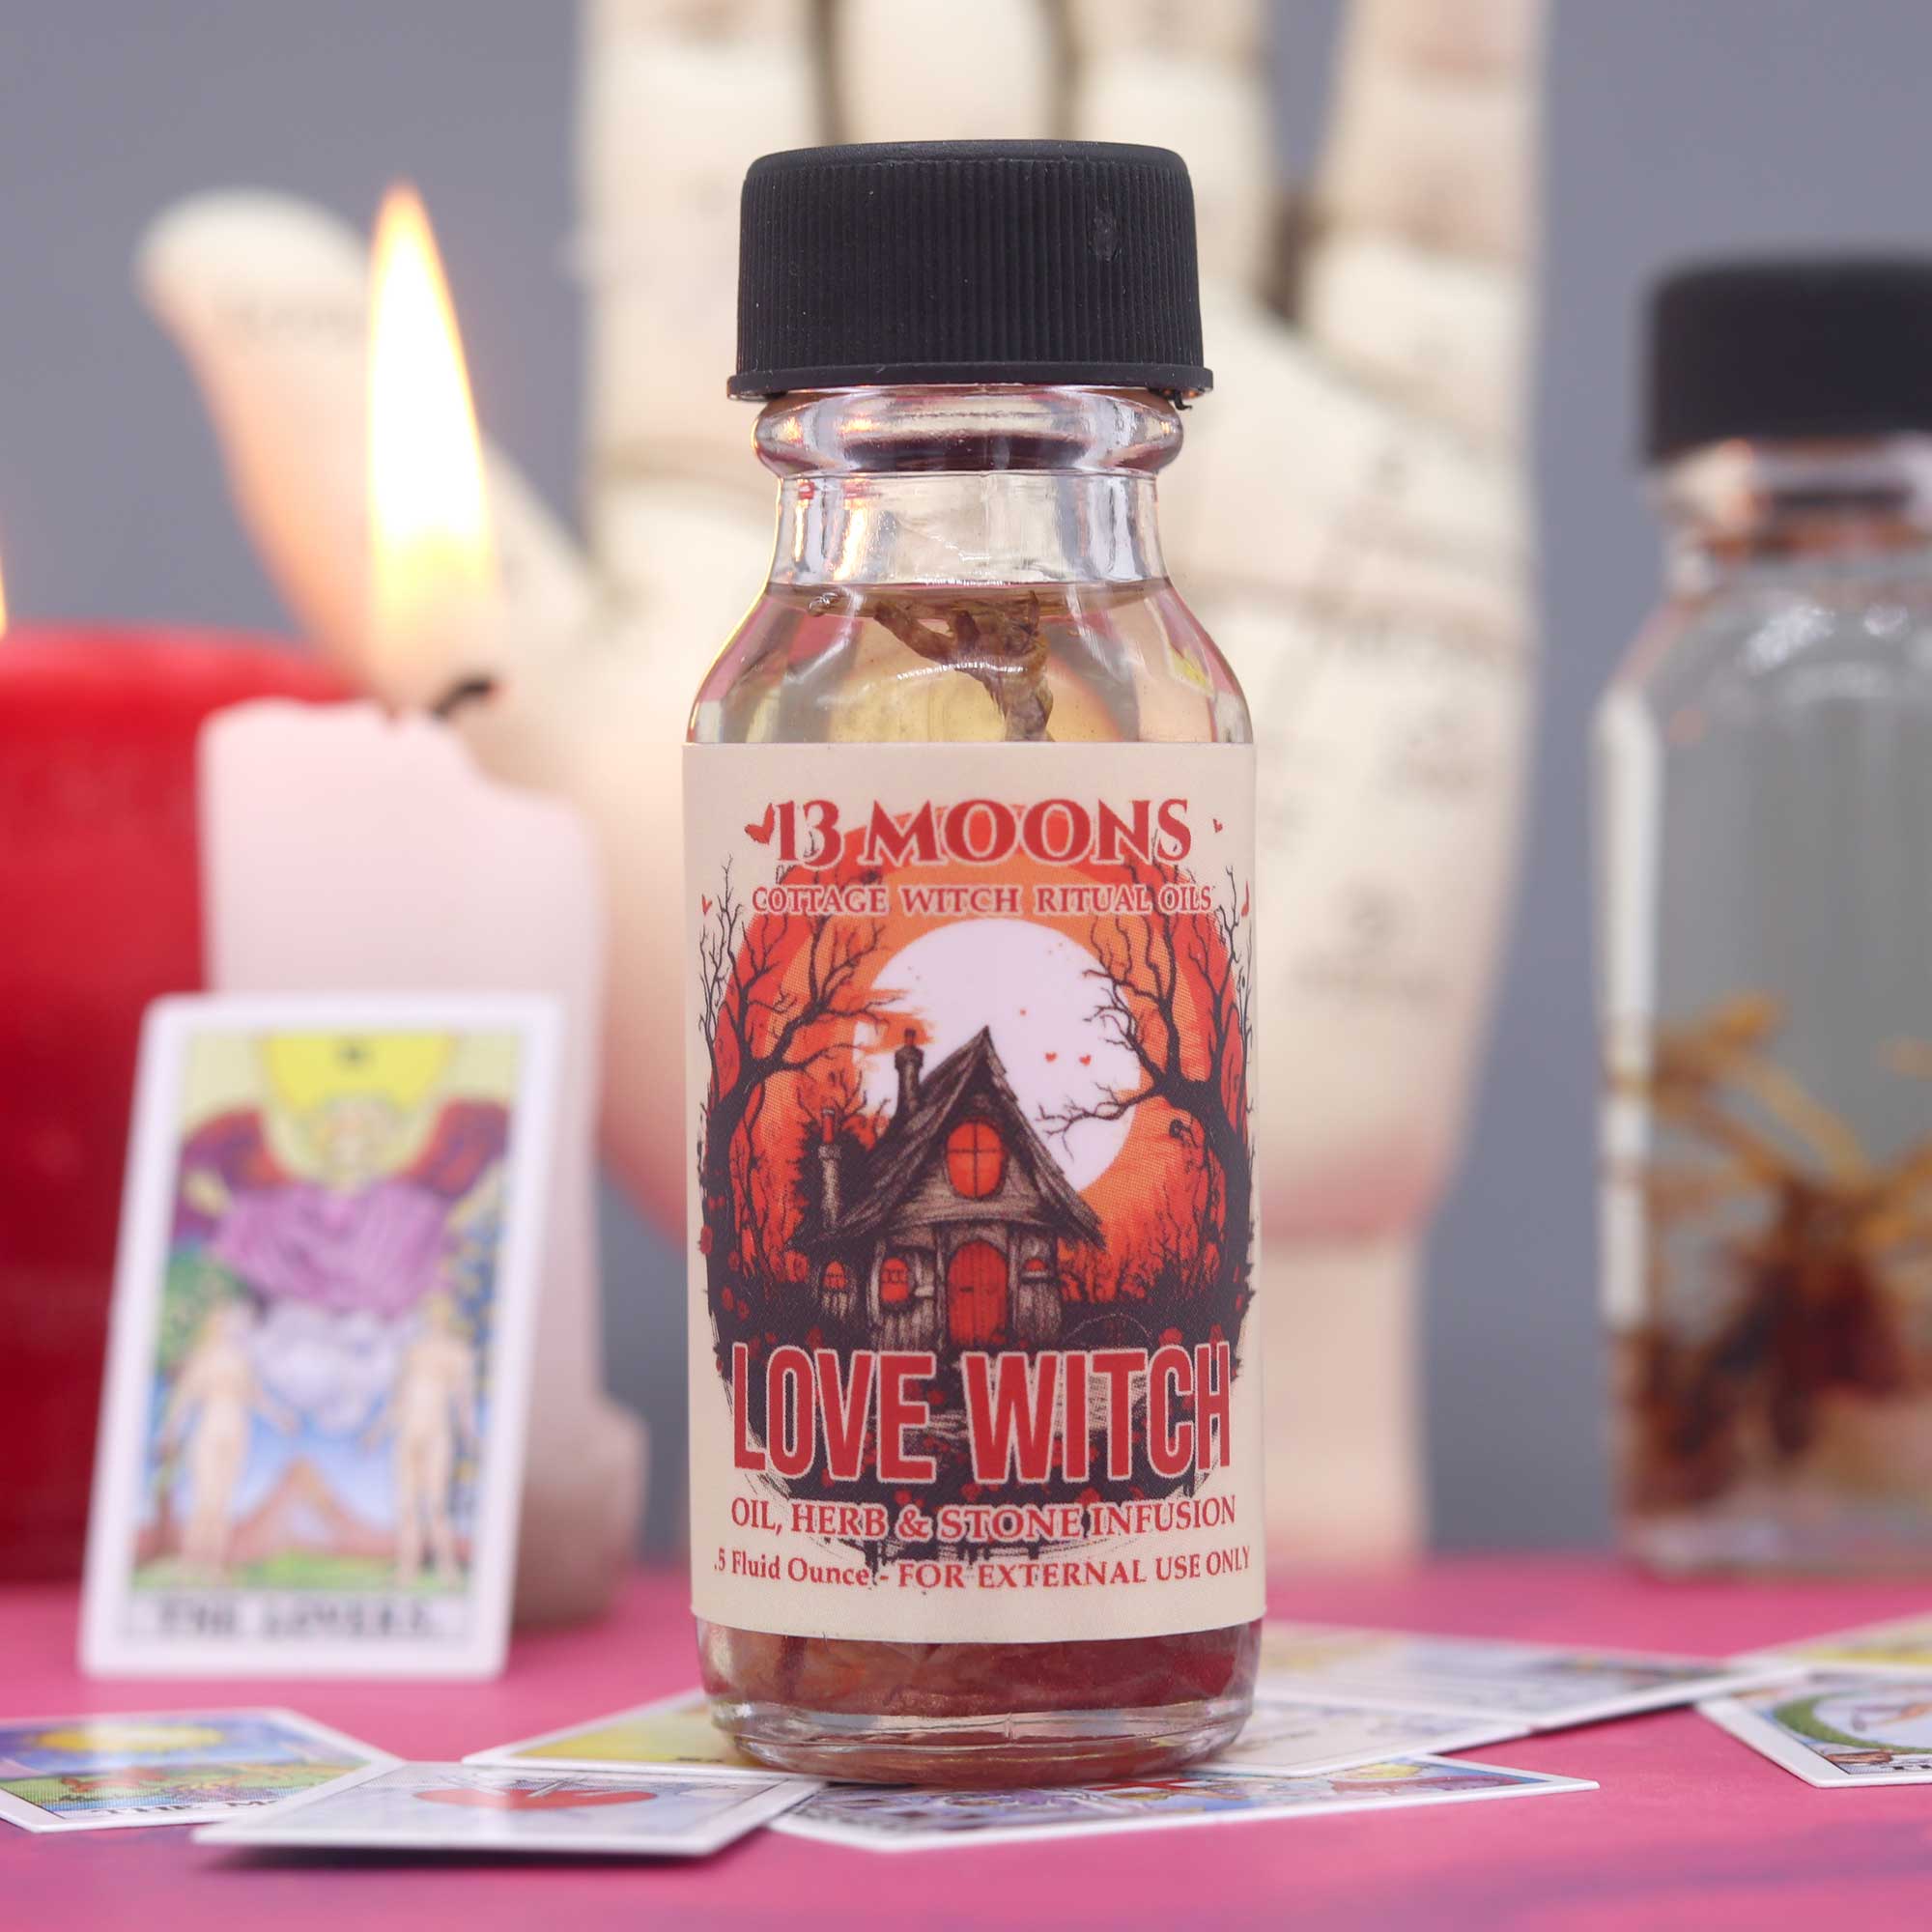 Love Witch Ritual Oil by 13 Moons - 13 Moons